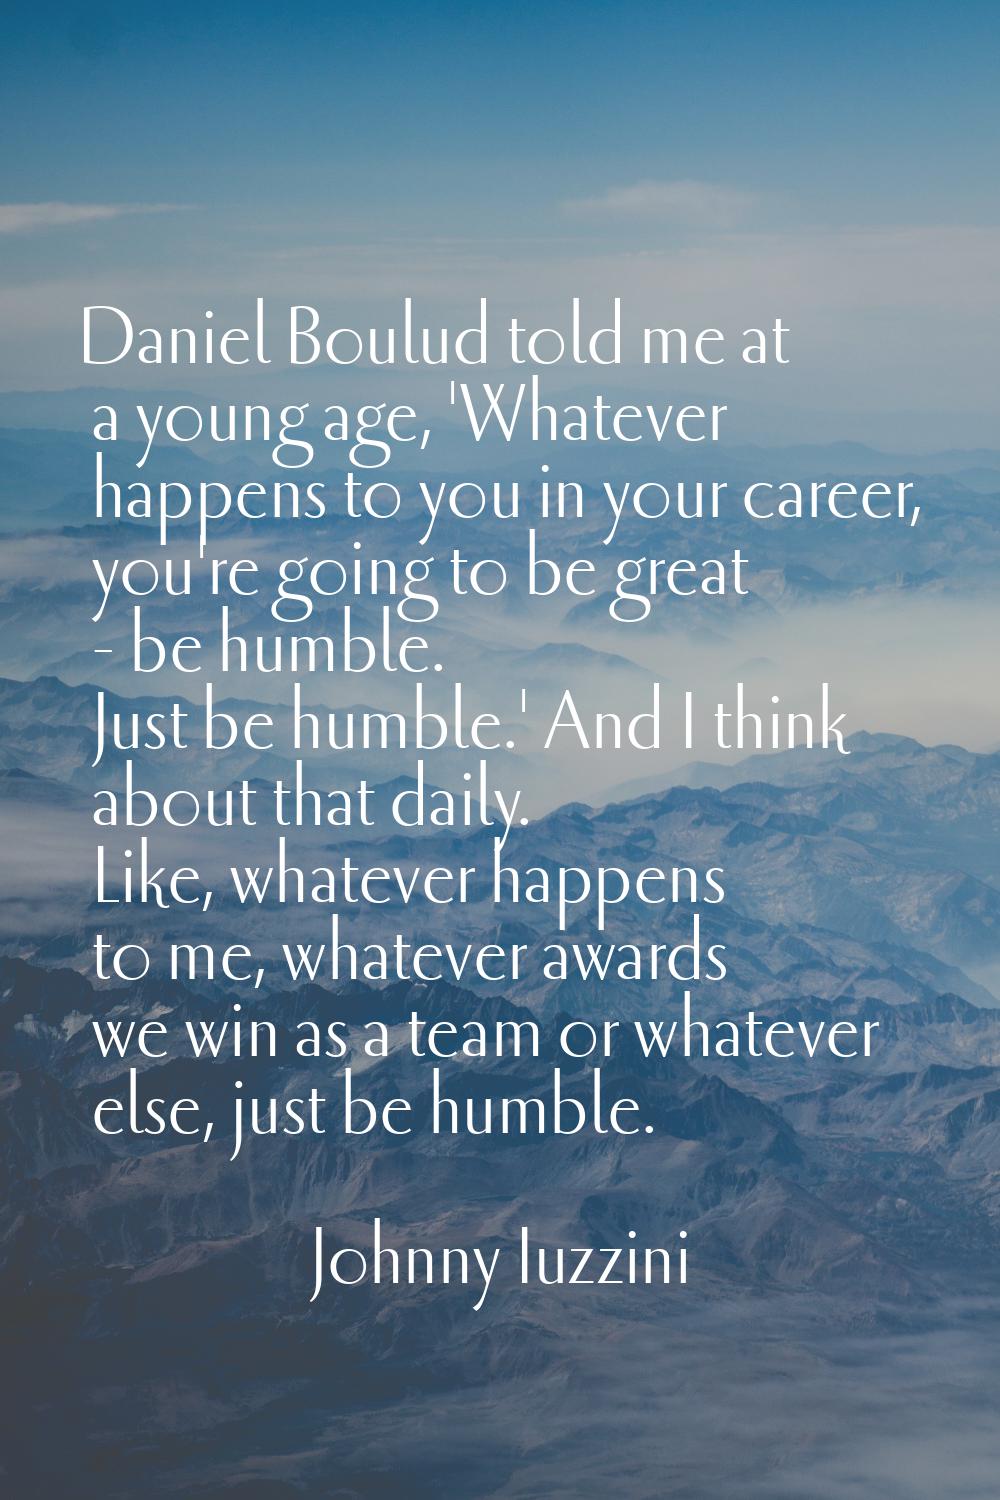 Daniel Boulud told me at a young age, 'Whatever happens to you in your career, you're going to be g